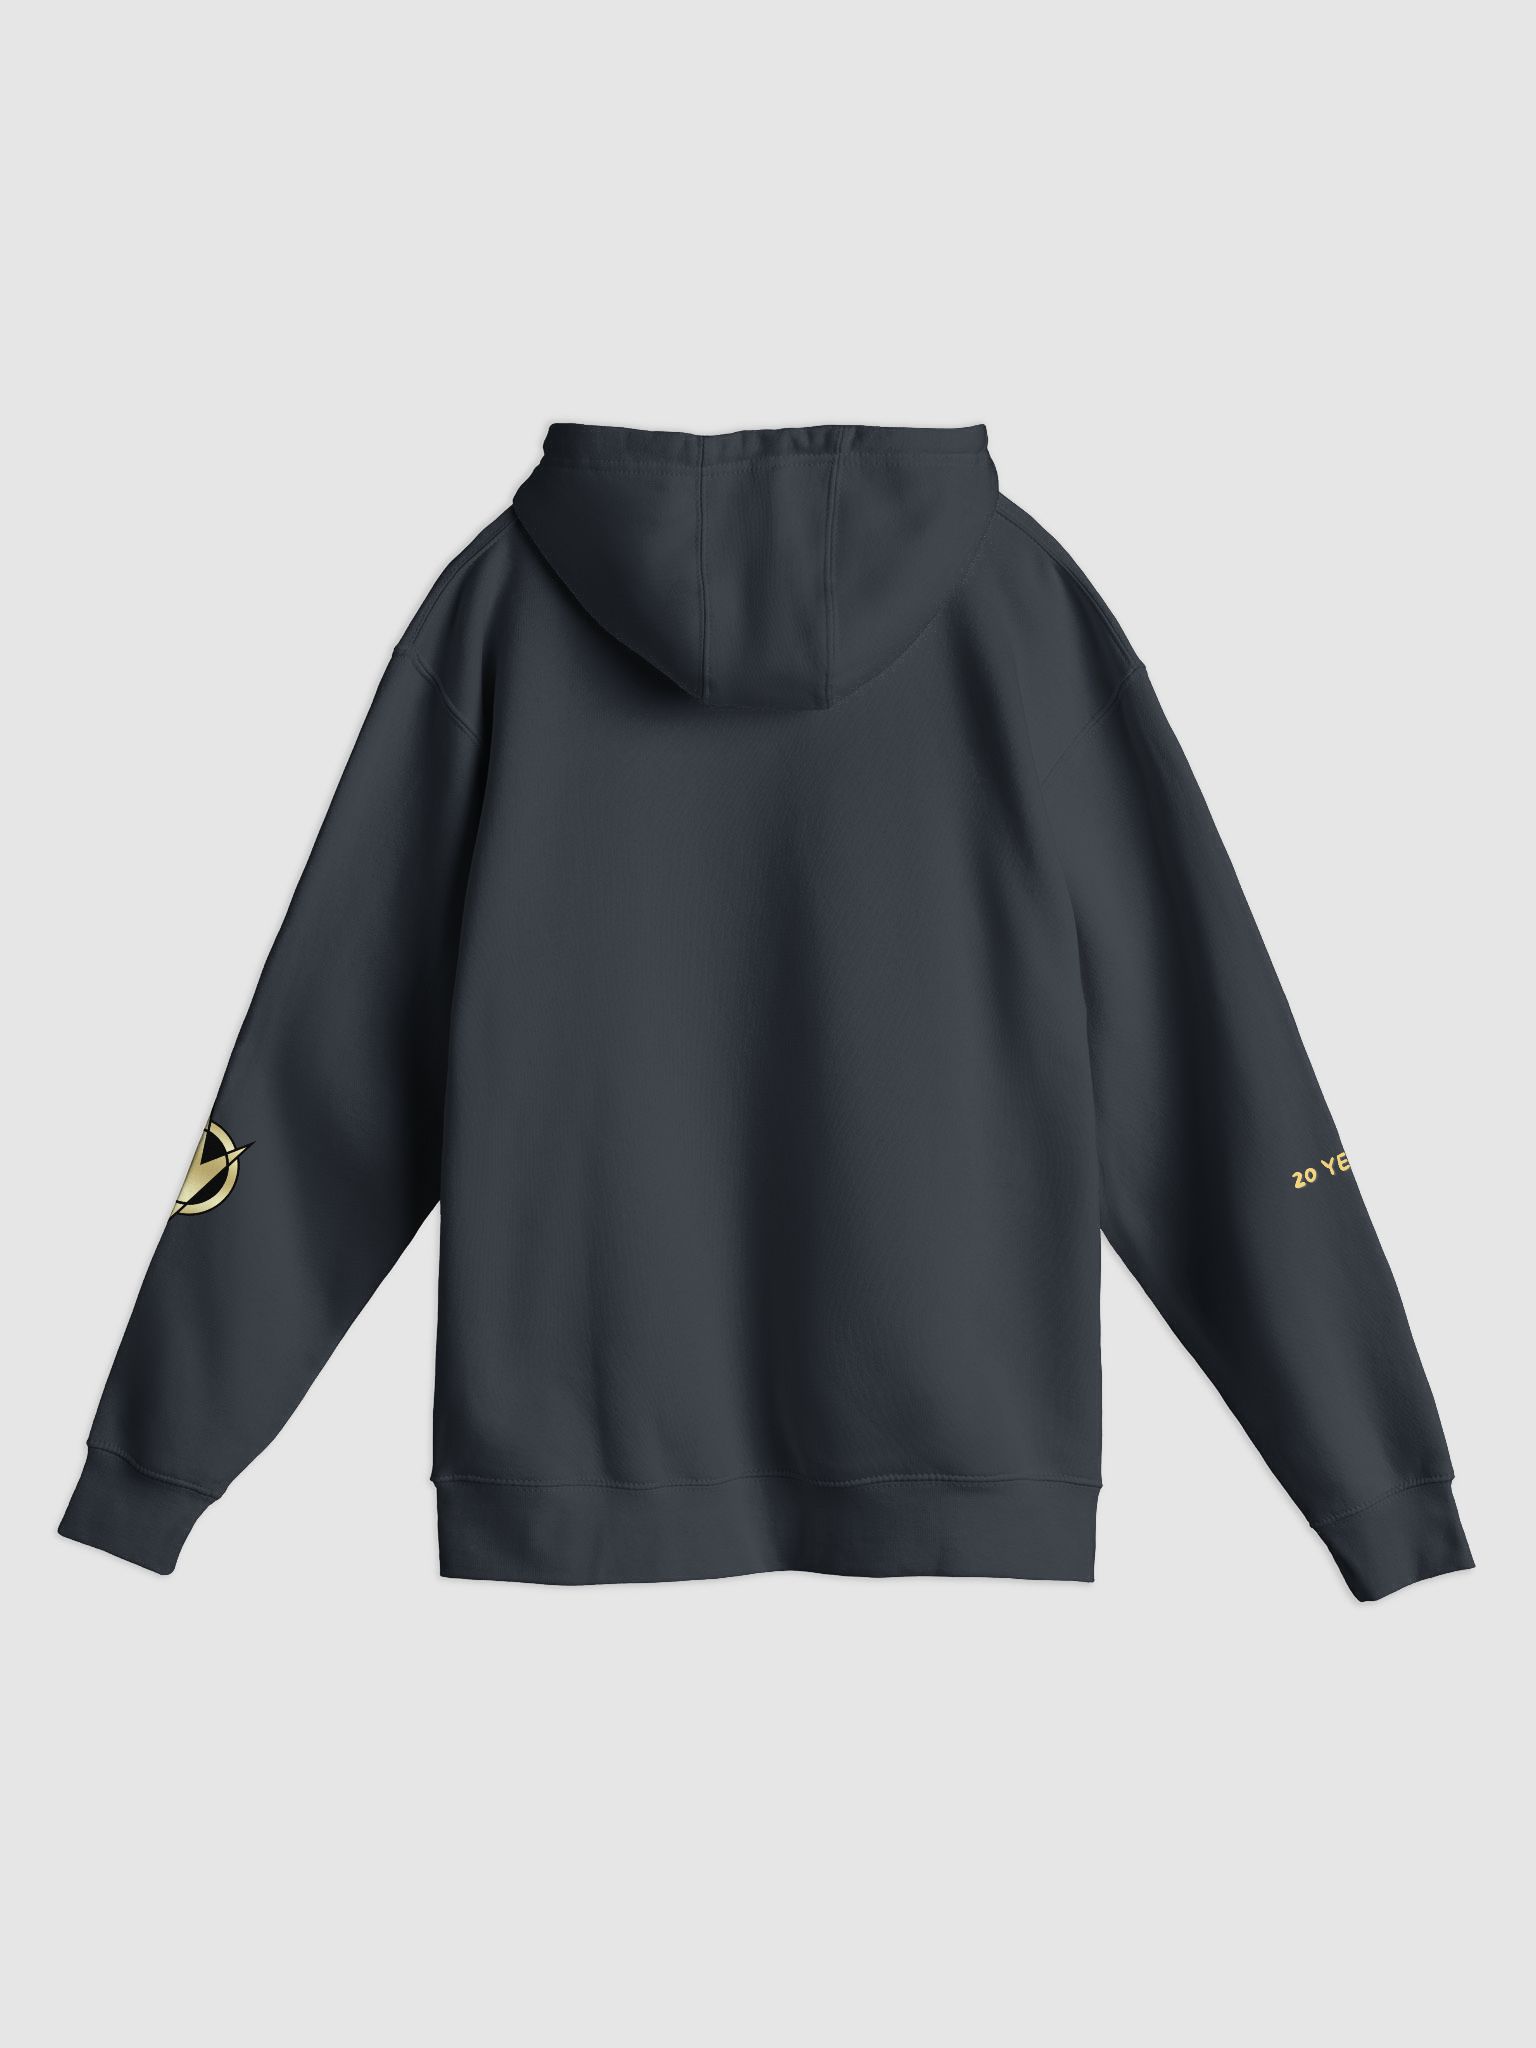 Limited Edition 20th Anniversary Hoodie | PRDT Design Lab